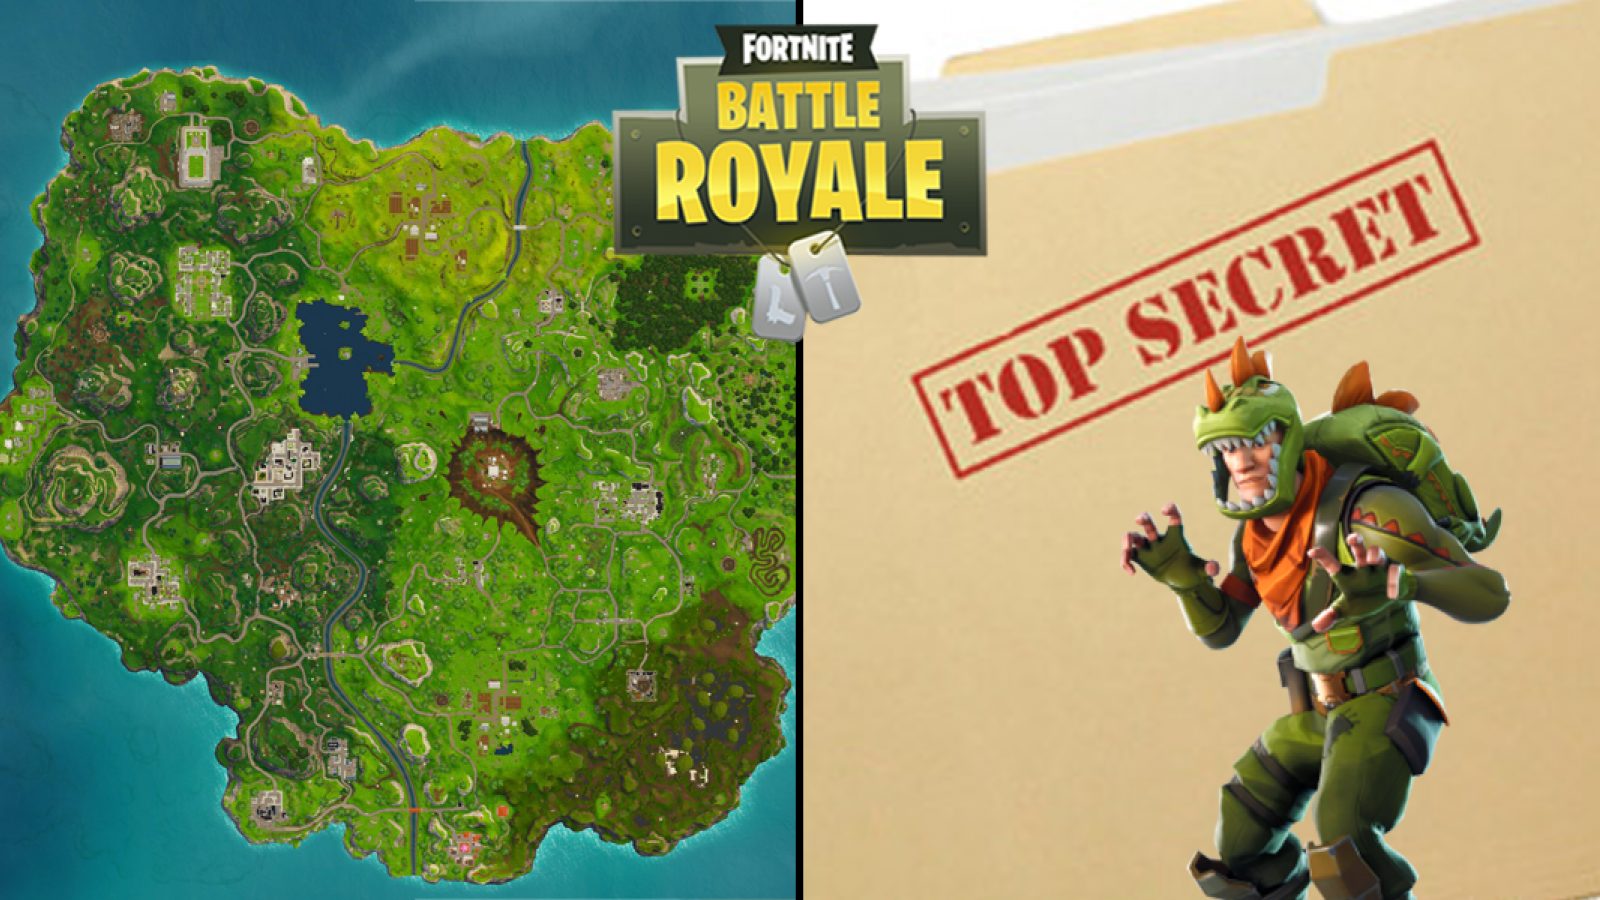 Leaked Image Show Major Changes Ing To The Fortnite Battle